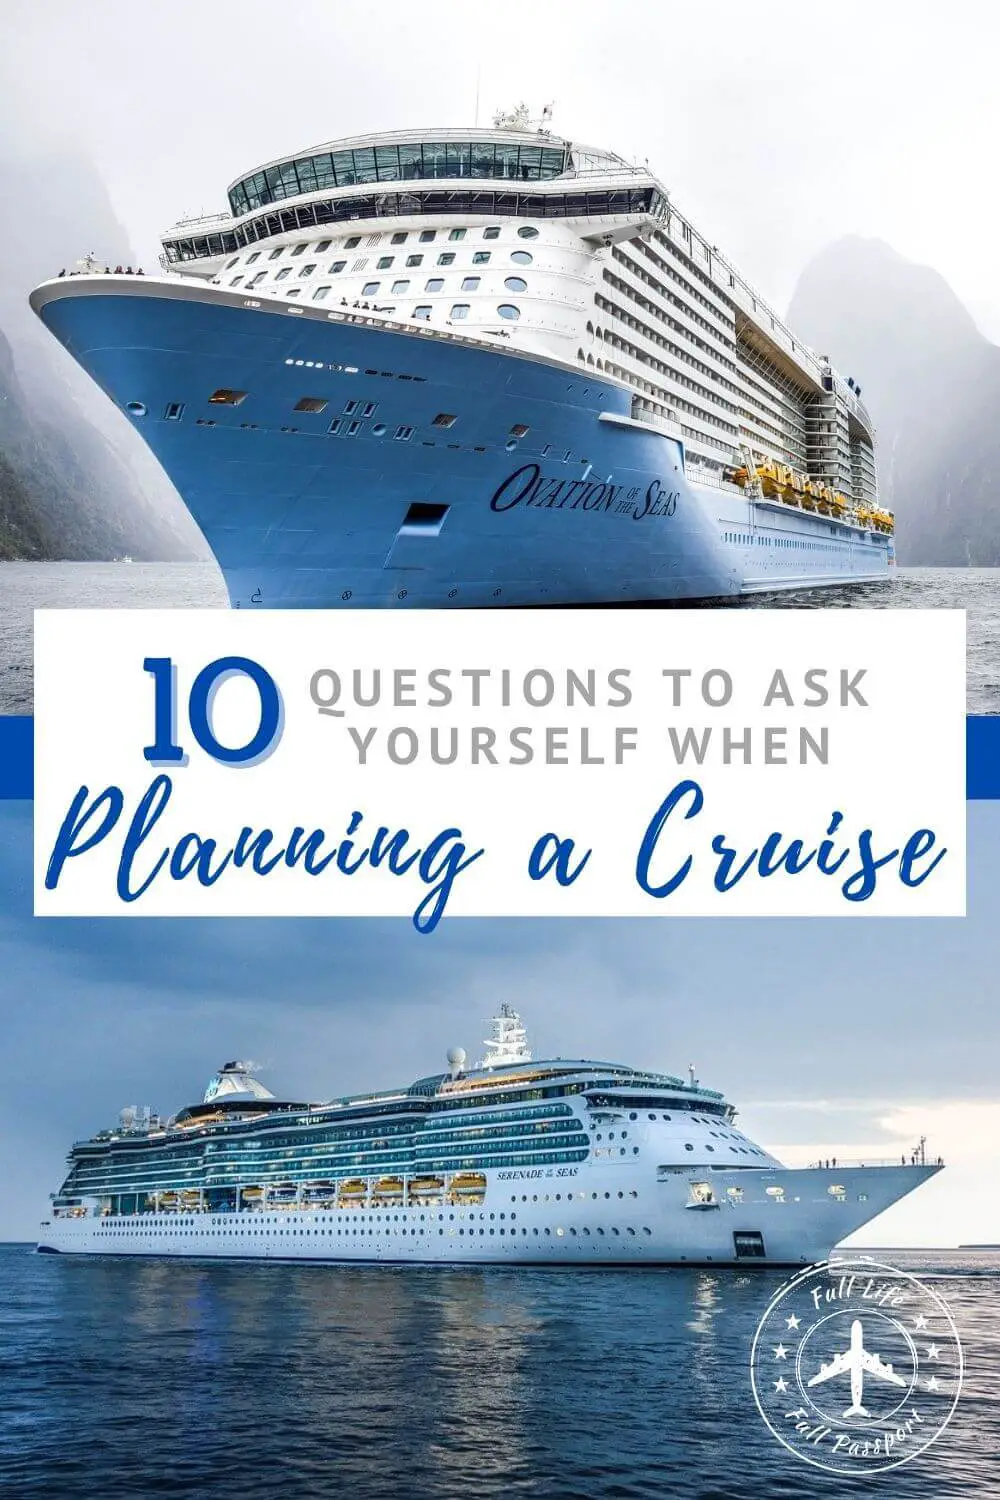 10 Questions to Ask Yourself When Planning a Cruise